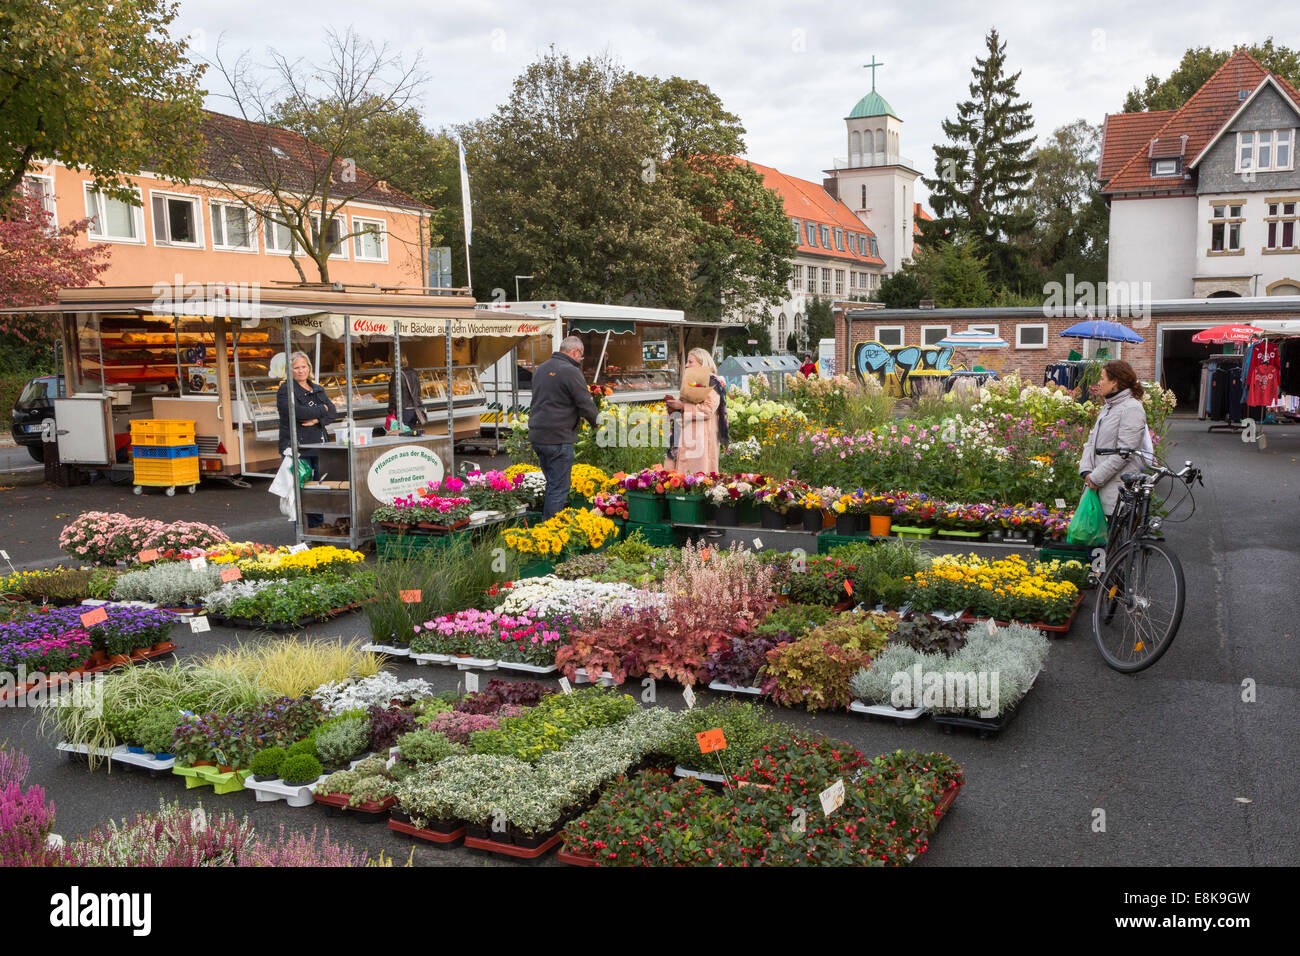 Customers at a flower and plant stall at the Jakobuskirchplatz market in Bielefeld, Germany Stock Photo